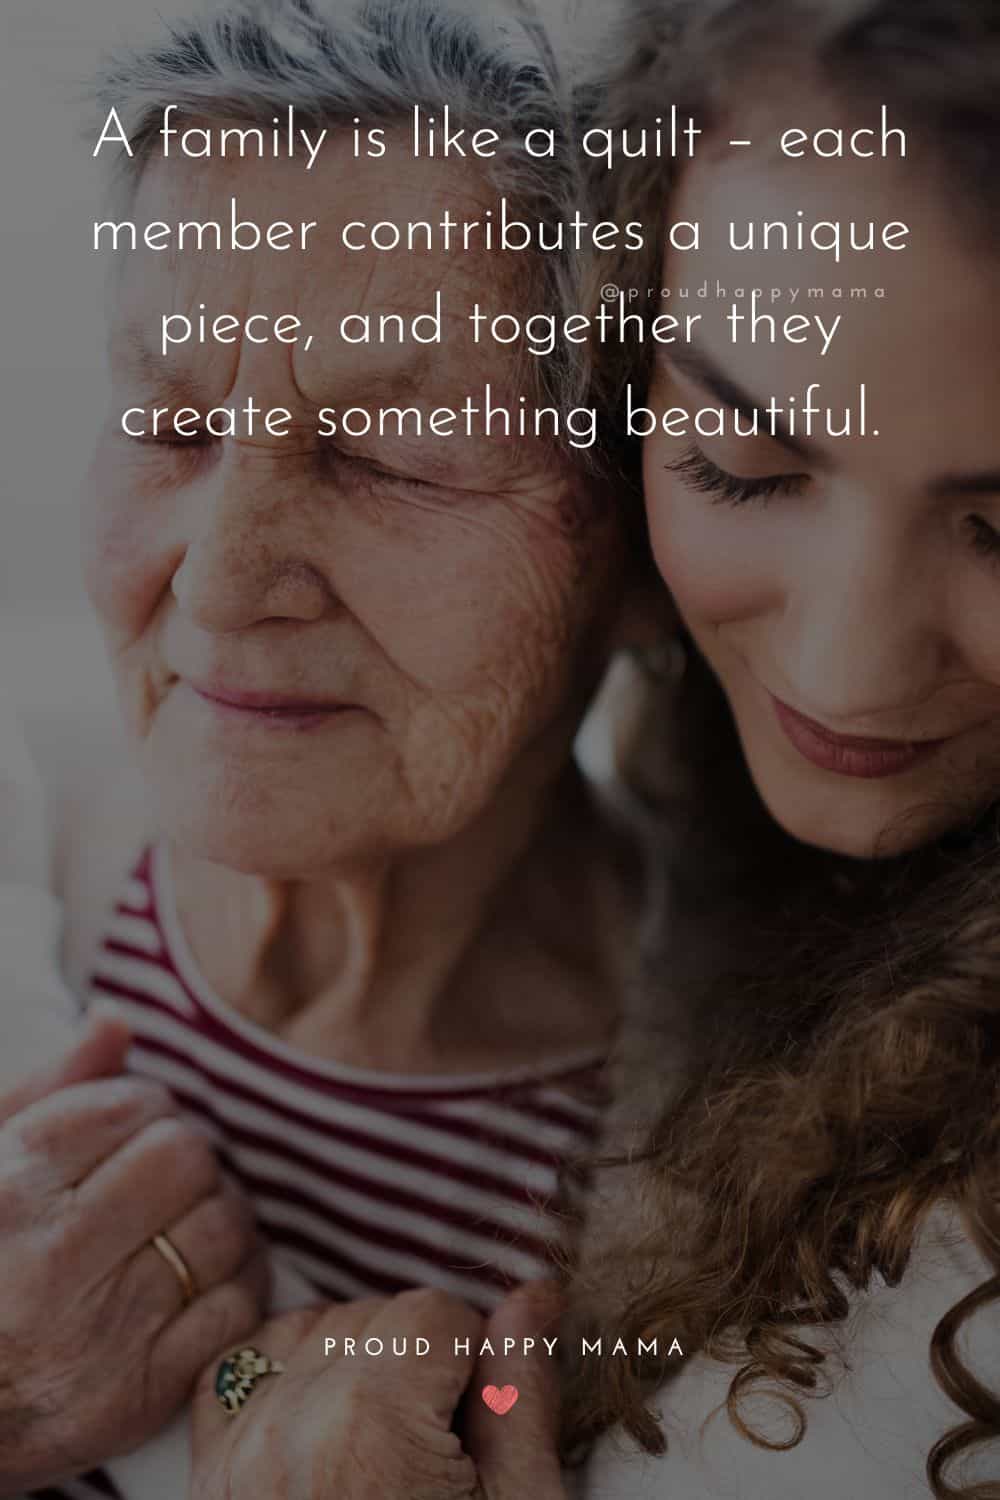 time with family quotes - A family is like a quilt – each member contributes a unique piece, and together they create something beautiful.